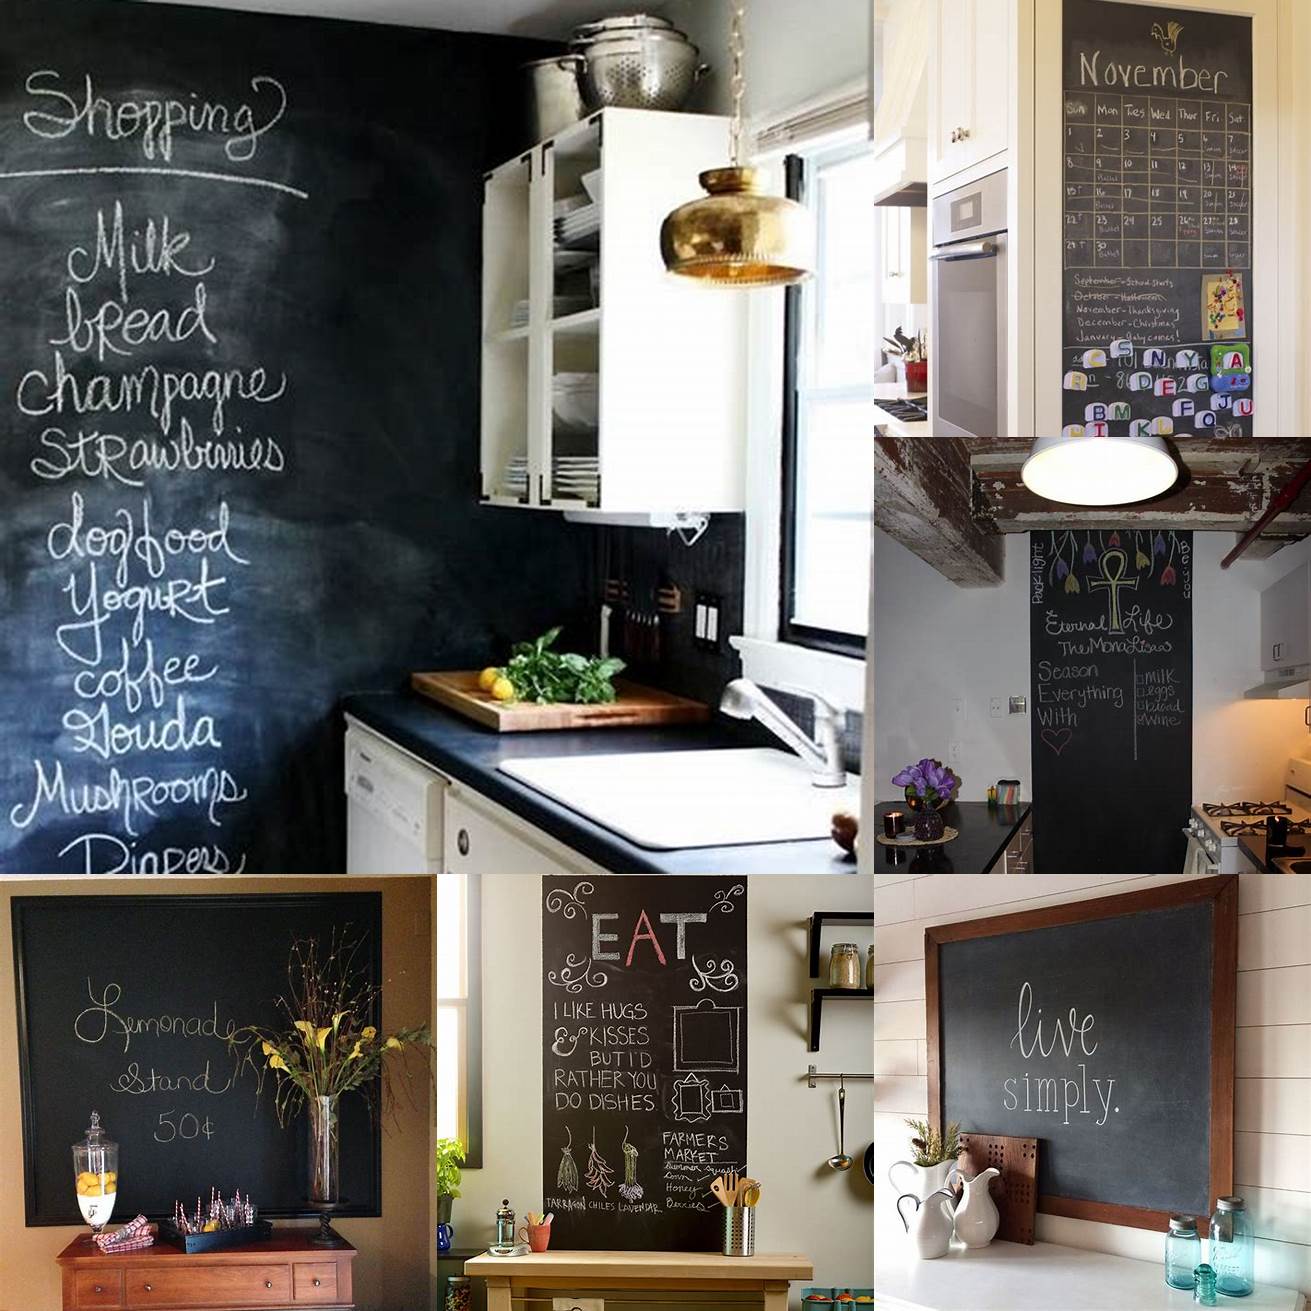 4 Communication The kitchen chalkboard can also be used for leaving messages and notes for family members Whether its a reminder to take out the trash or a love note for your spouse the chalkboard is a great way to communicate with your family